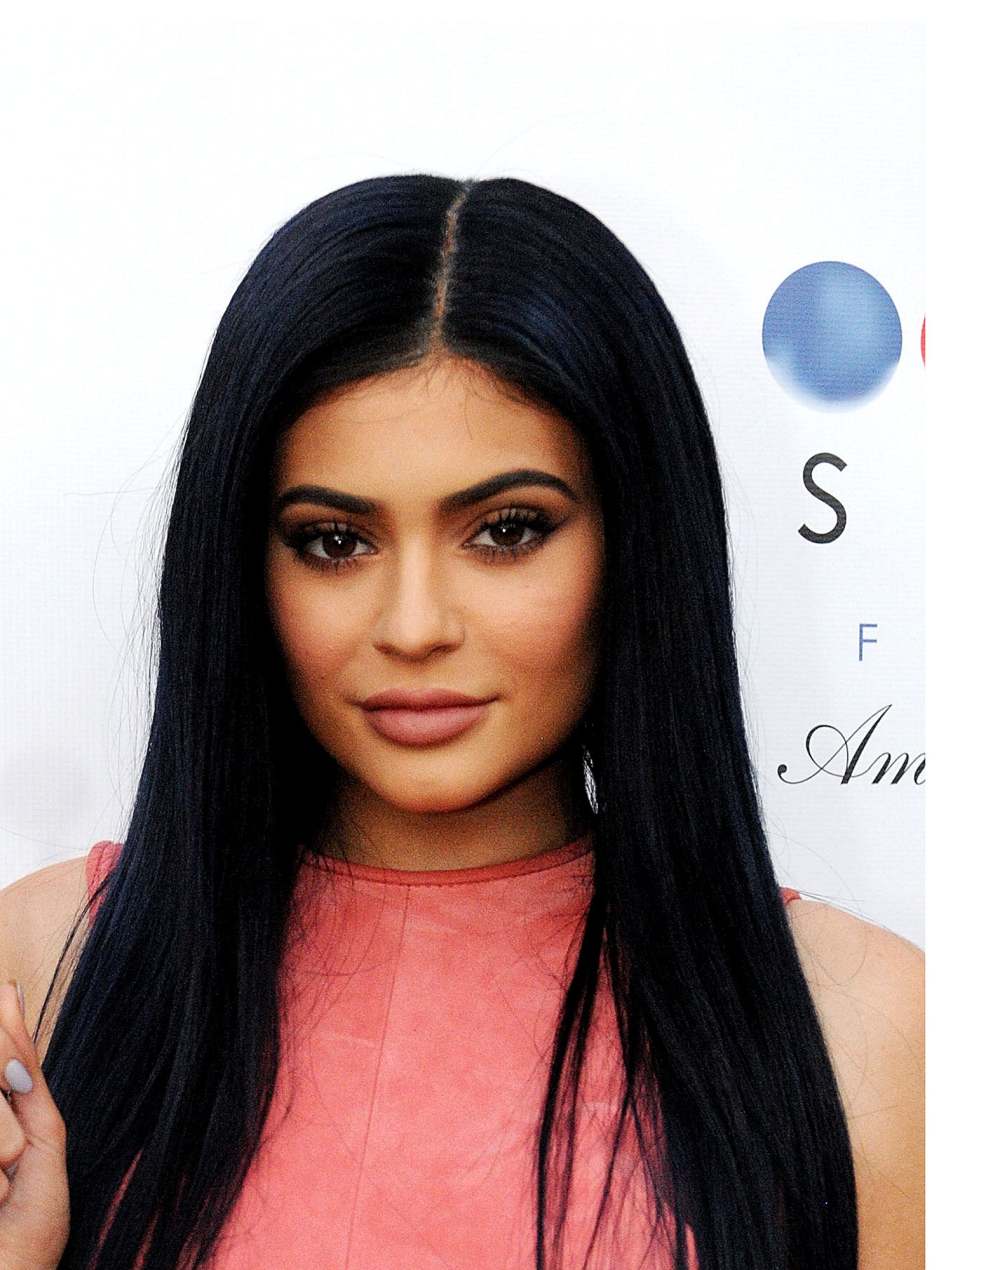 Kylie Jenner Talks Changing Appearance